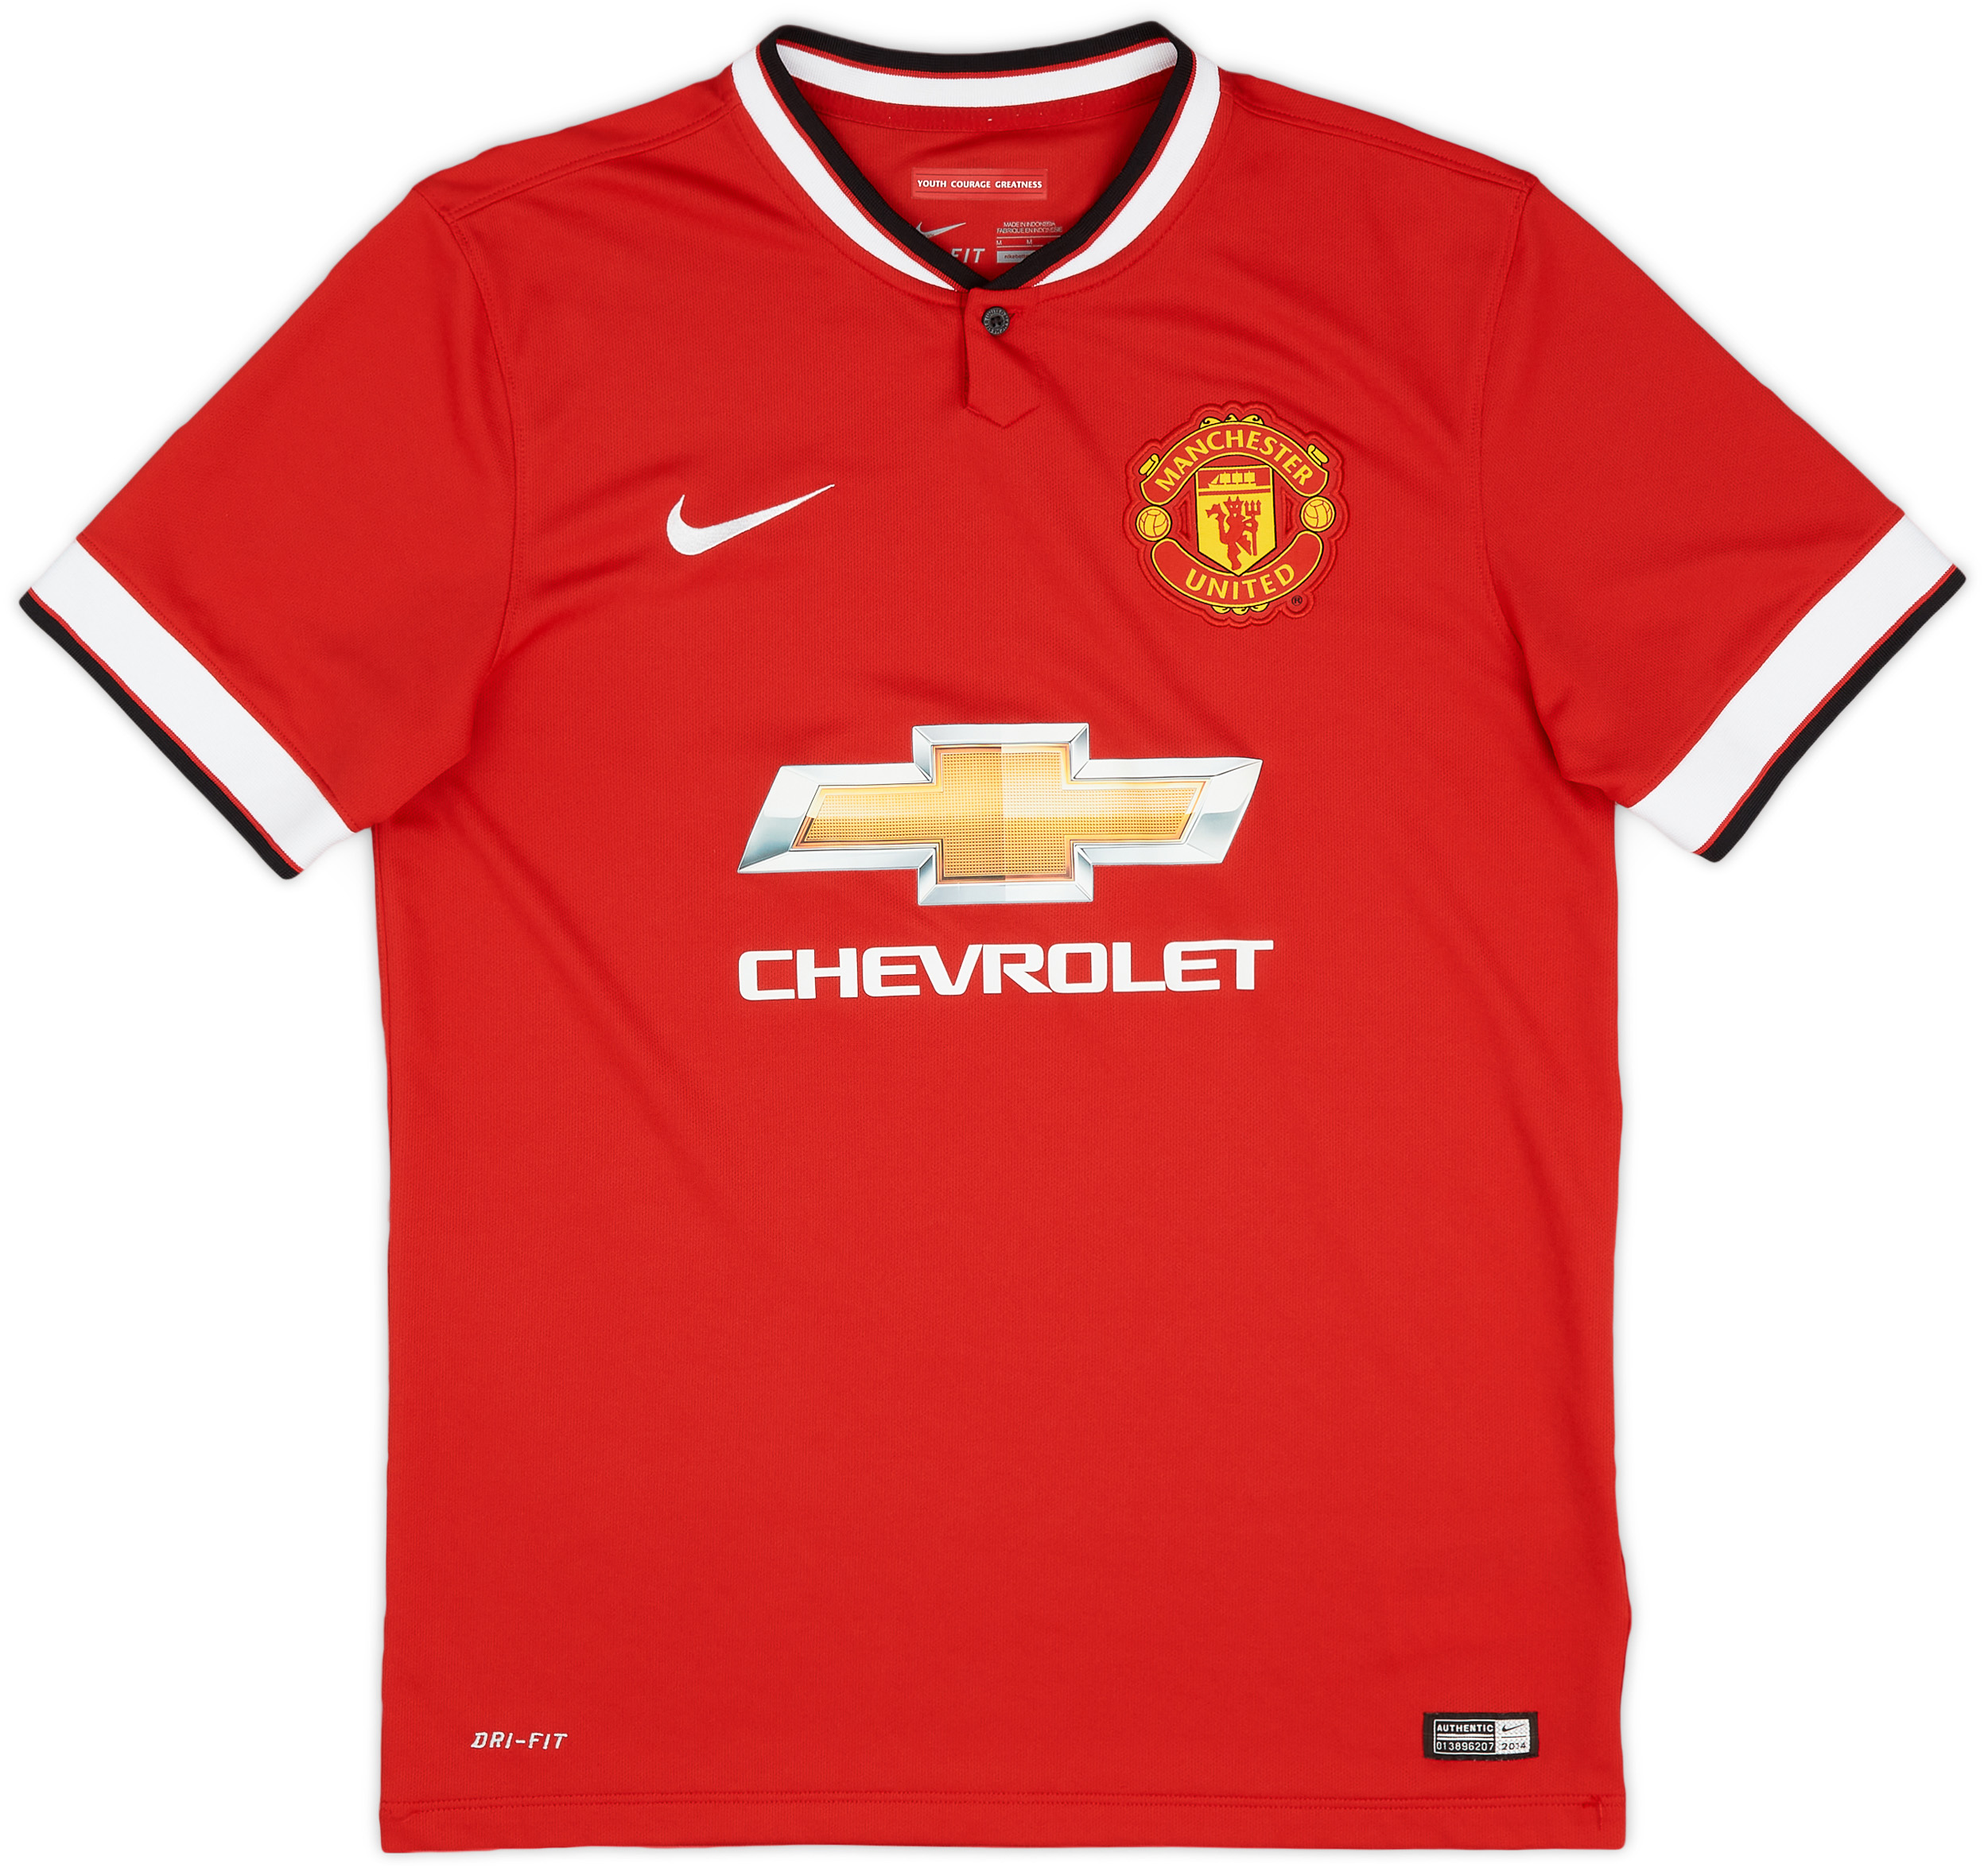 2014-15 Manchester United Home Shirt - 9/10 - ()